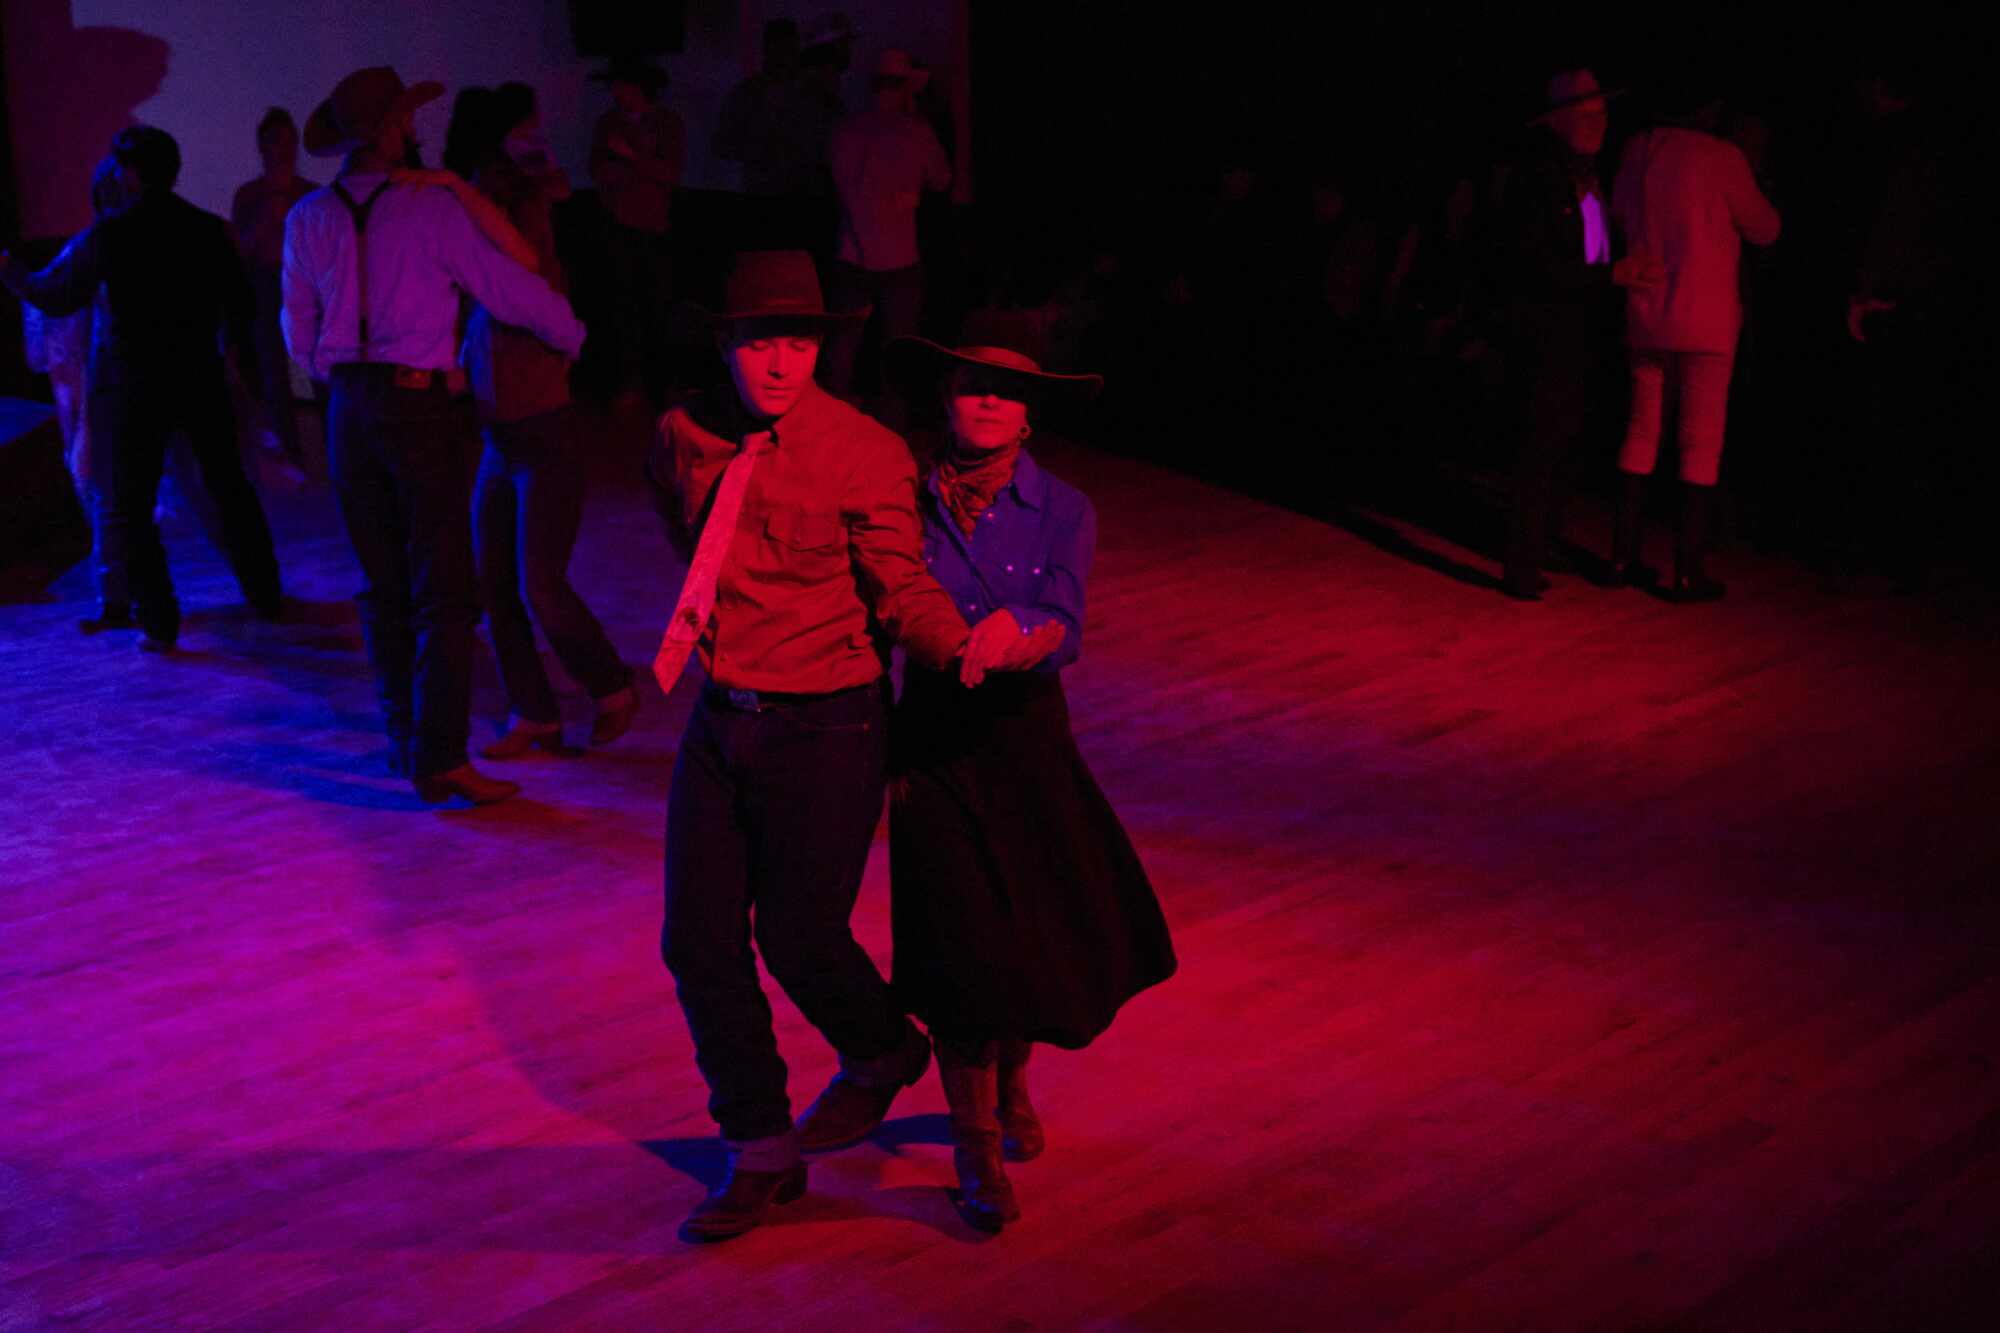 Johnny Reedy, left, and sister Brigid Reedy dance during the "Midnight Dance" at the National Cowboy Poetry Gathering.